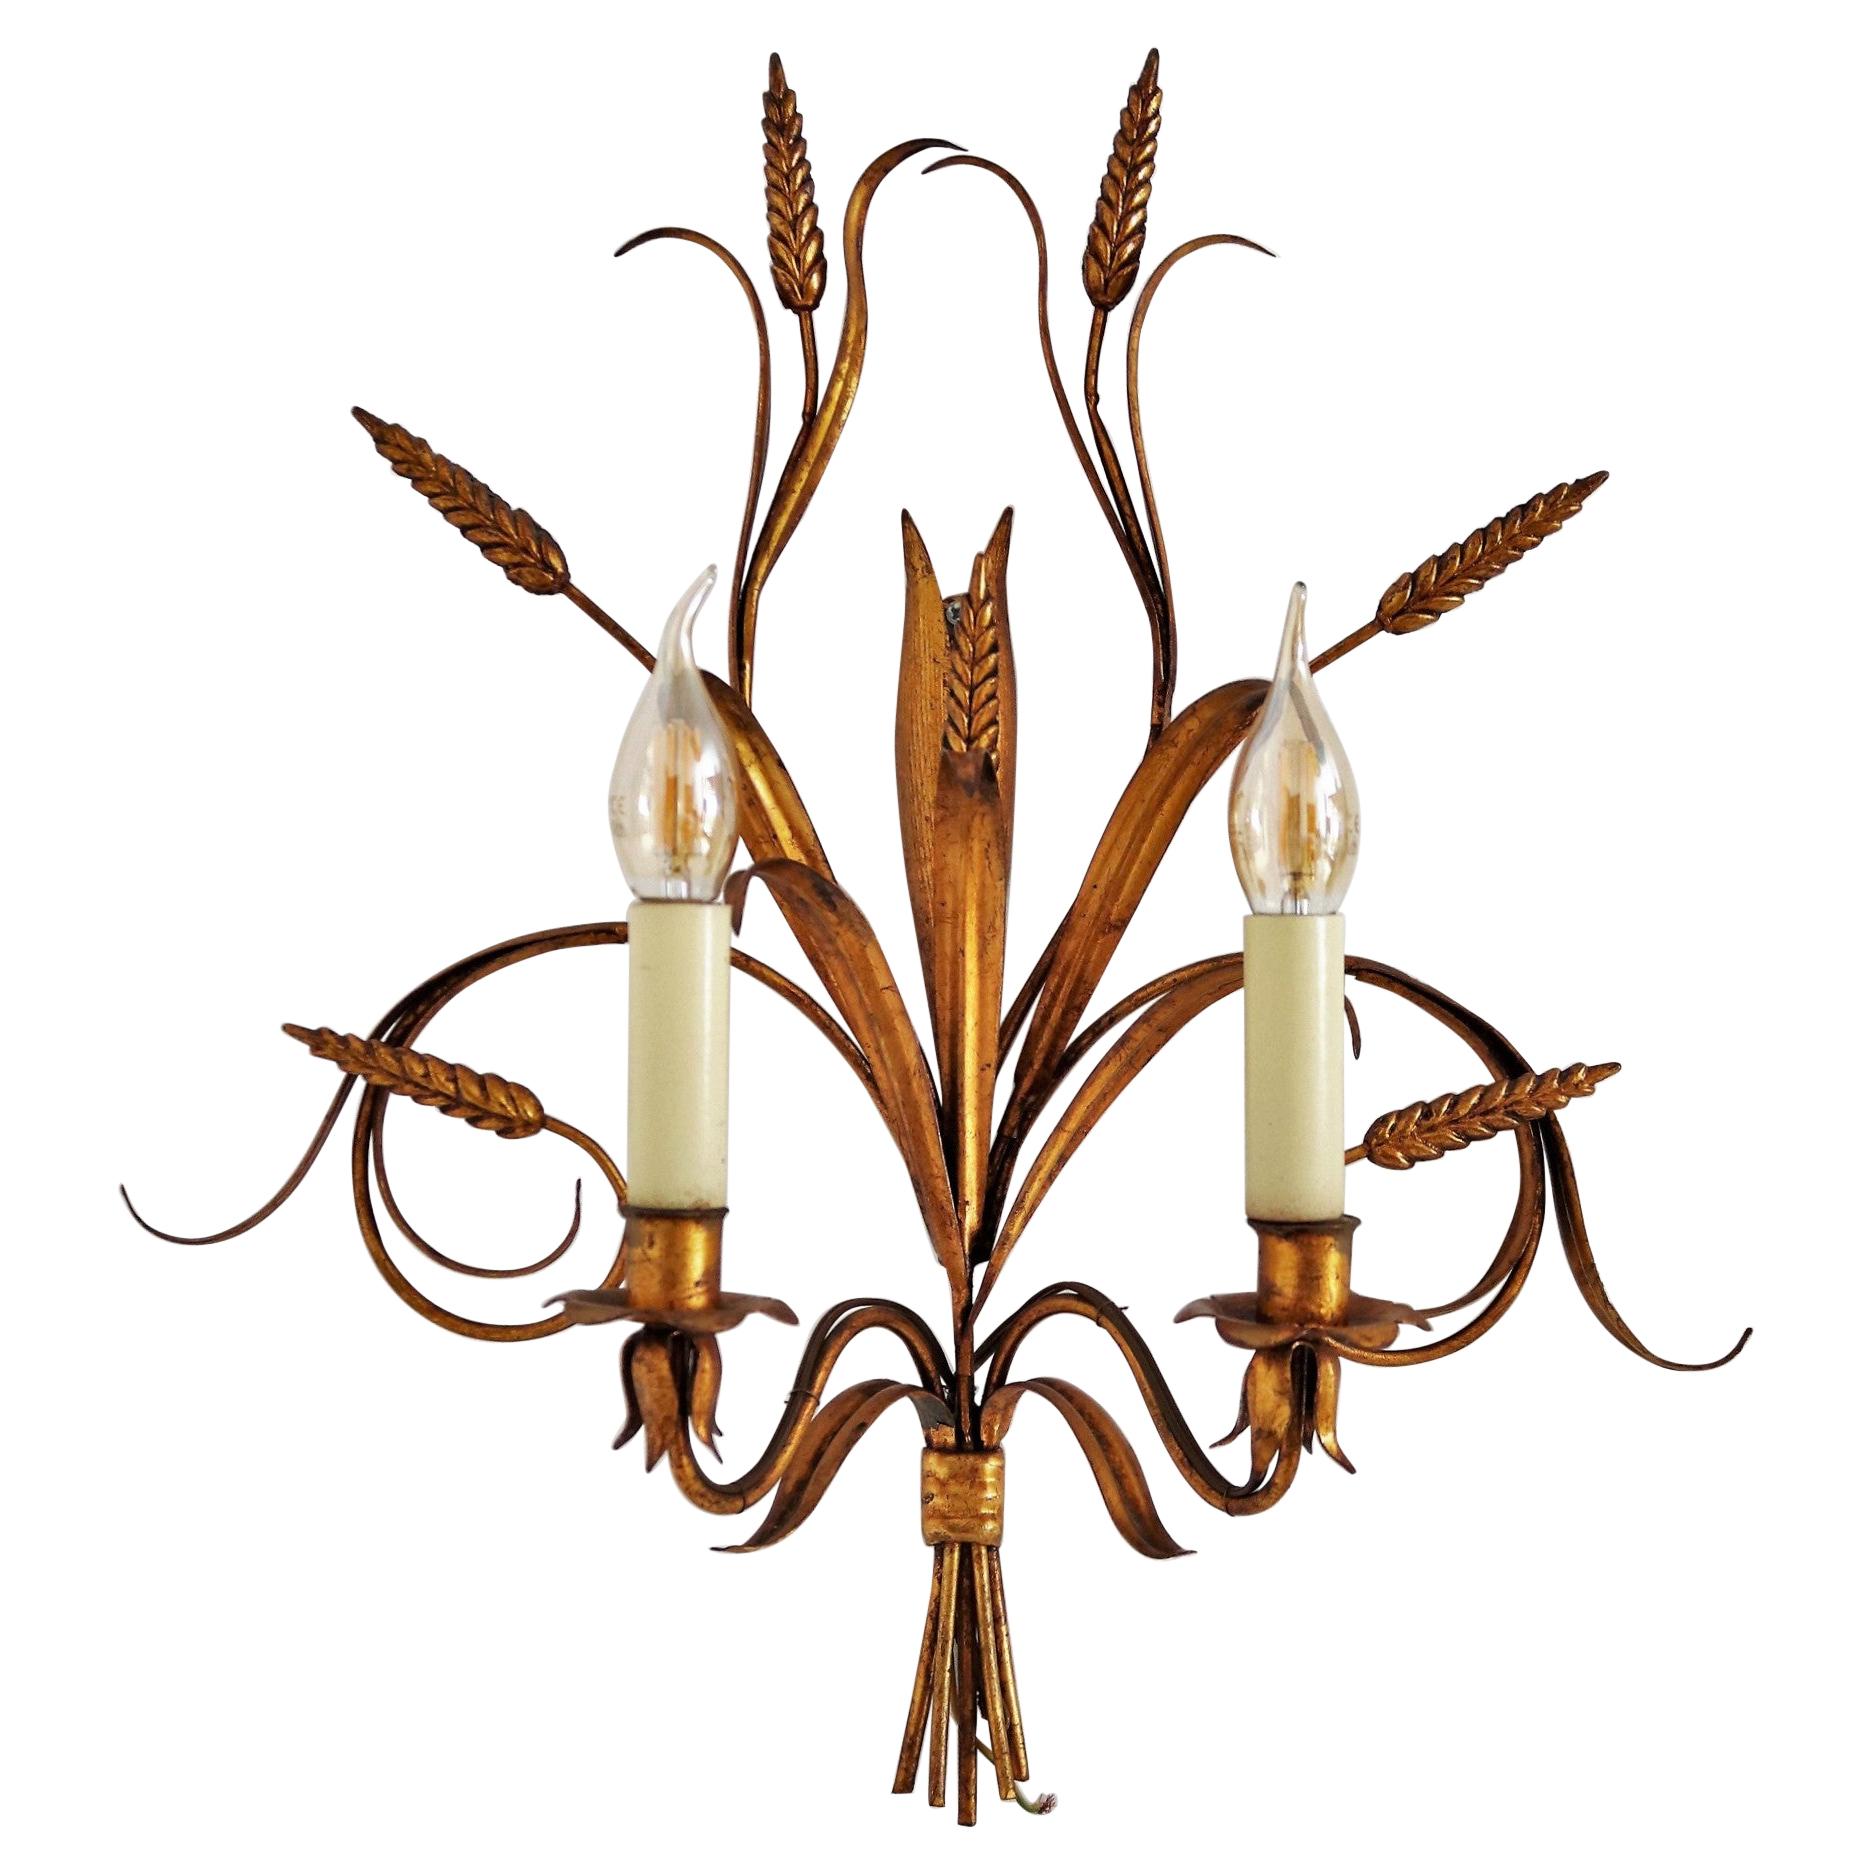 Italian Midcentury Gilt Tole Wall Sconces with Wheat Sheaf, 1950s, Set of Five